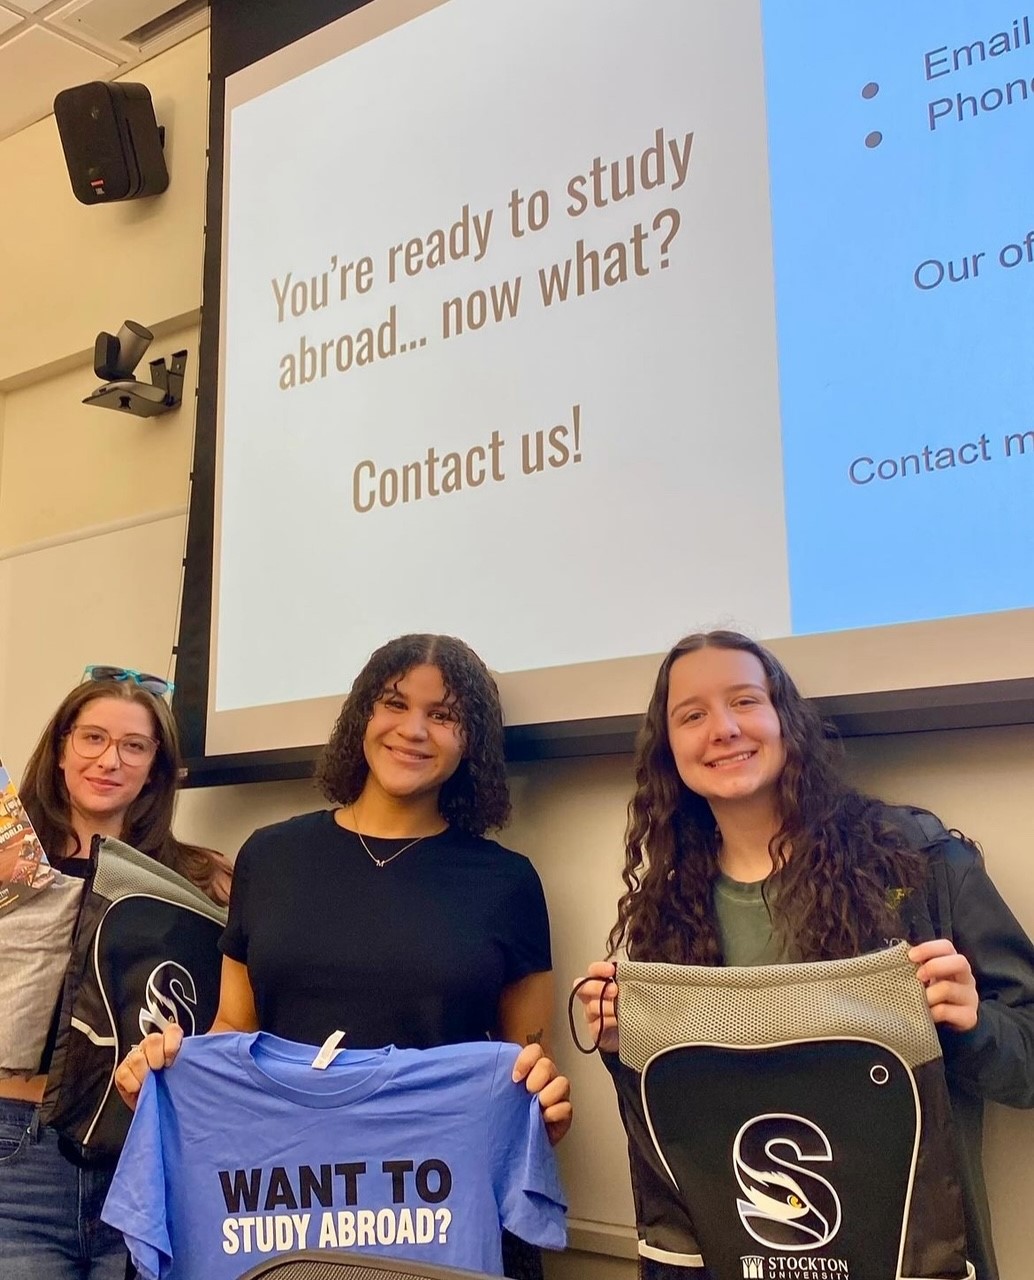 three students smiling, holding up study abroad shirts in front of a projector on the wall that states "You're ready to study abroad...now what?"